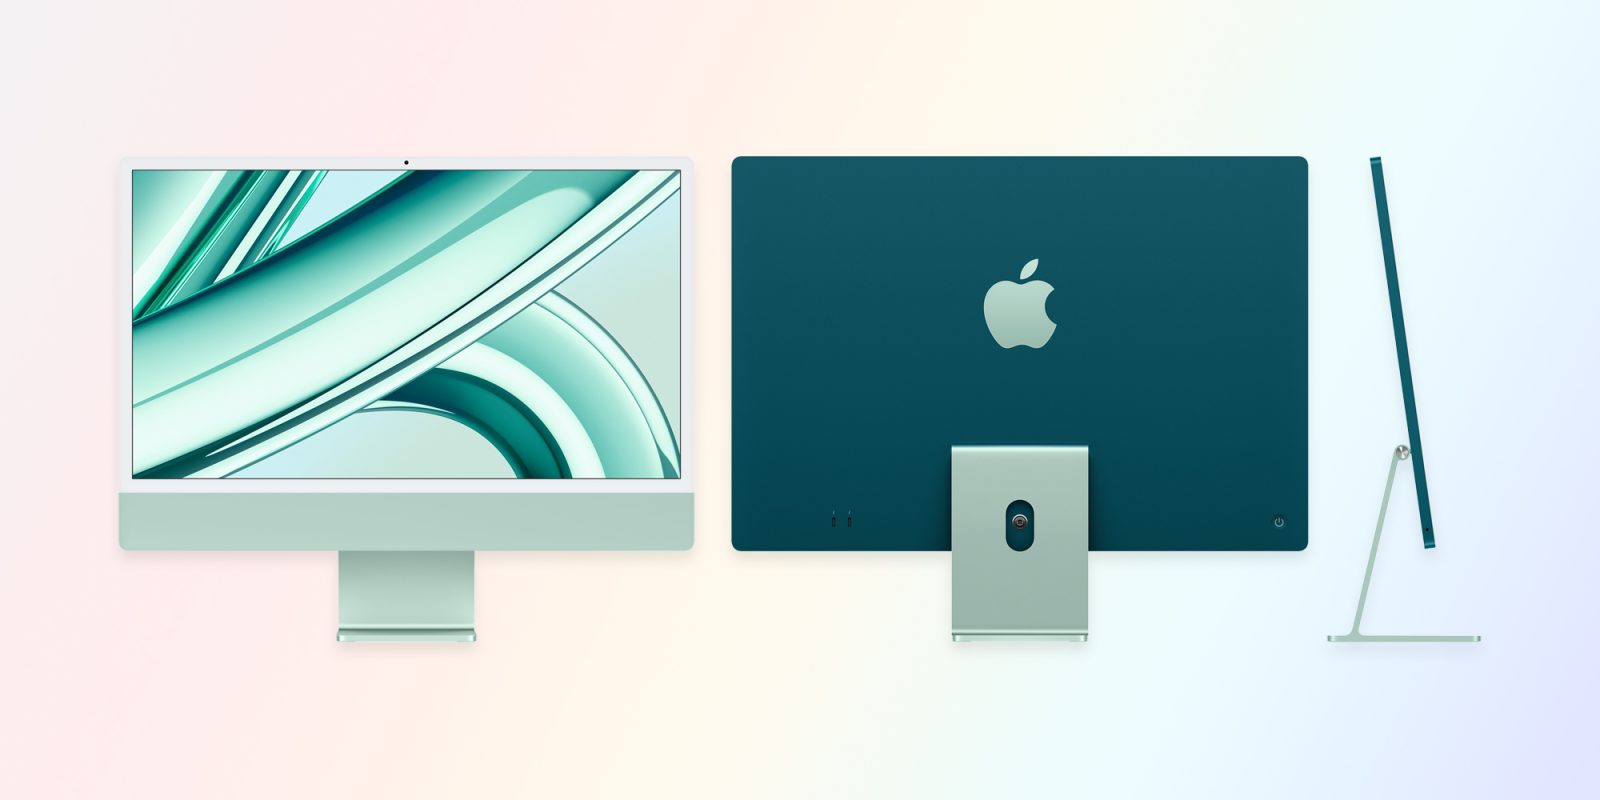 Here's what changes from the M1 iMac to the new M3 iMac